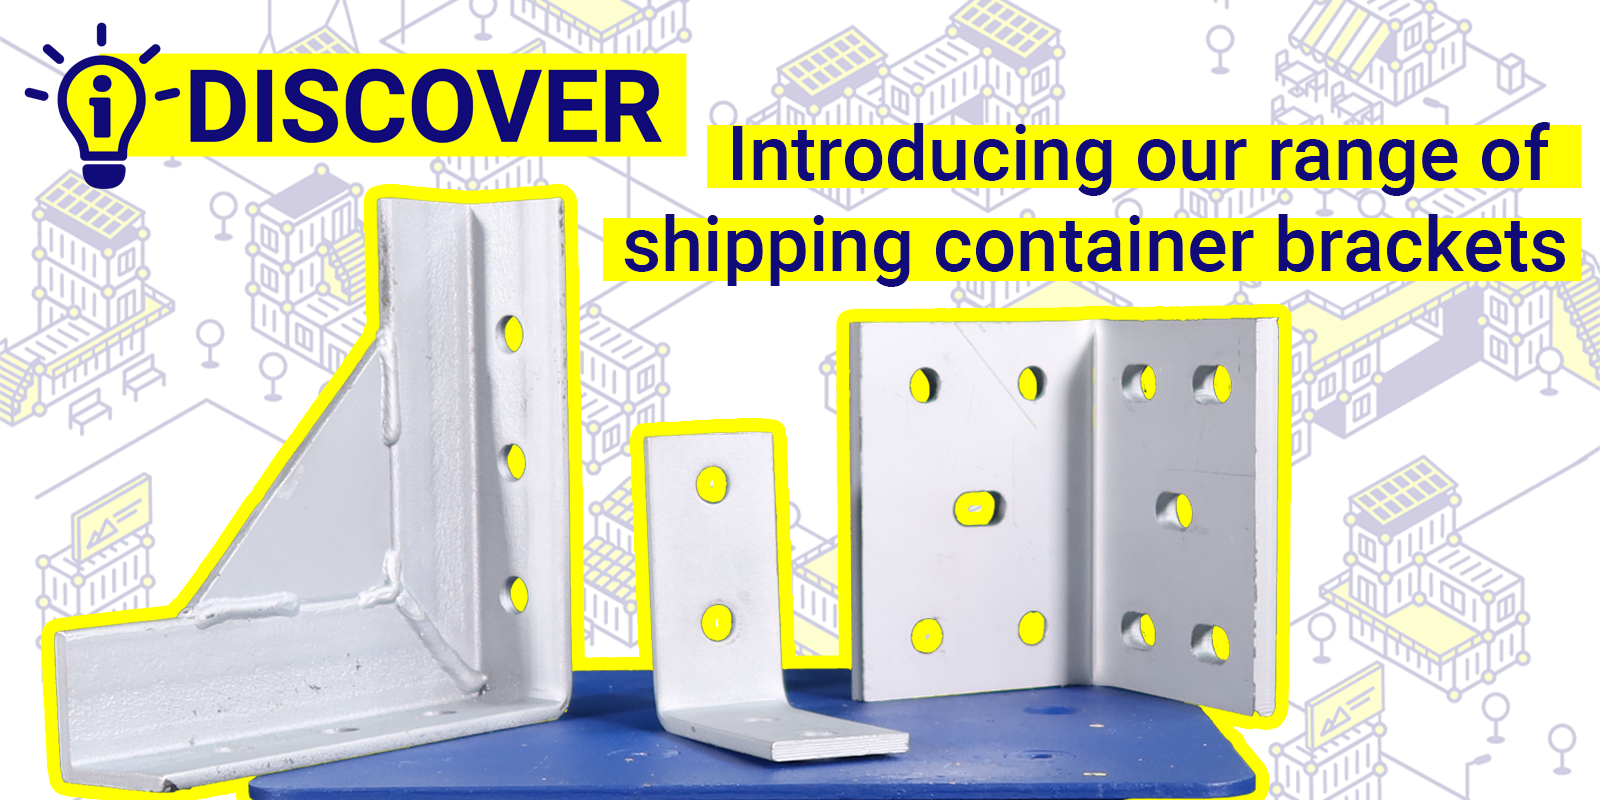 Introducing our range of shipping container brackets